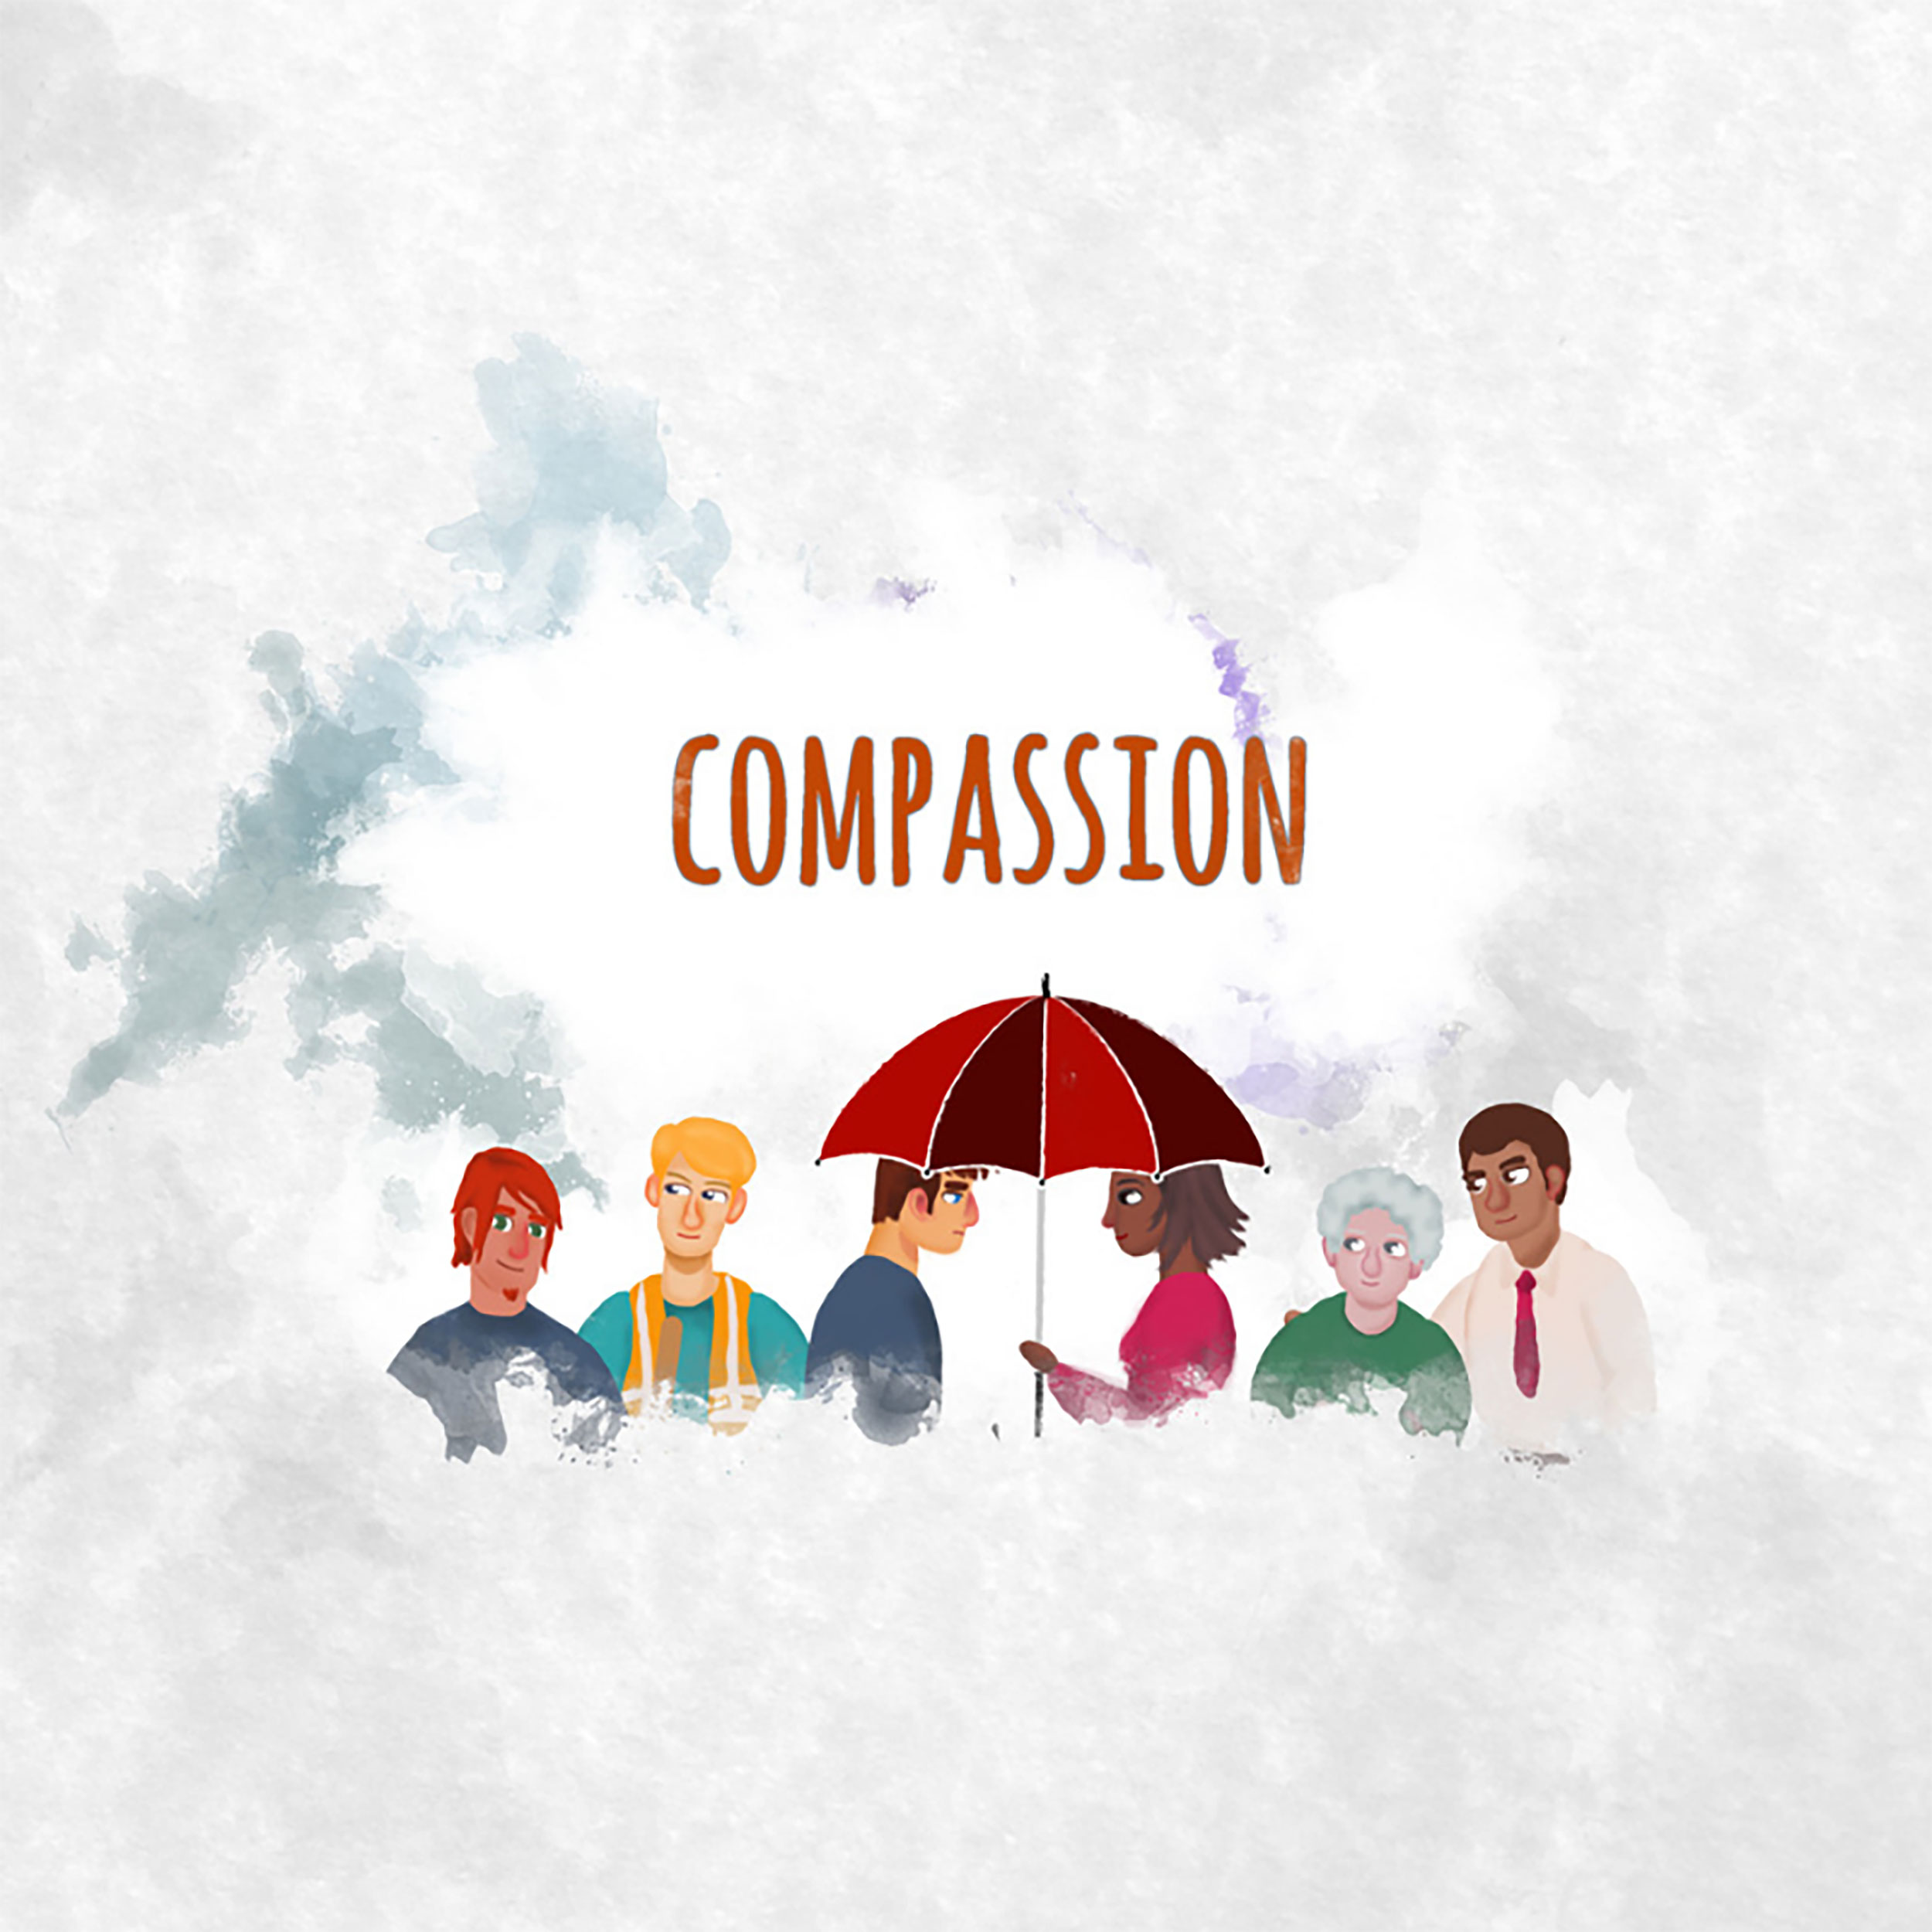 Image shows the word compassion with two people talking under an umbrella, in between two other people on each side